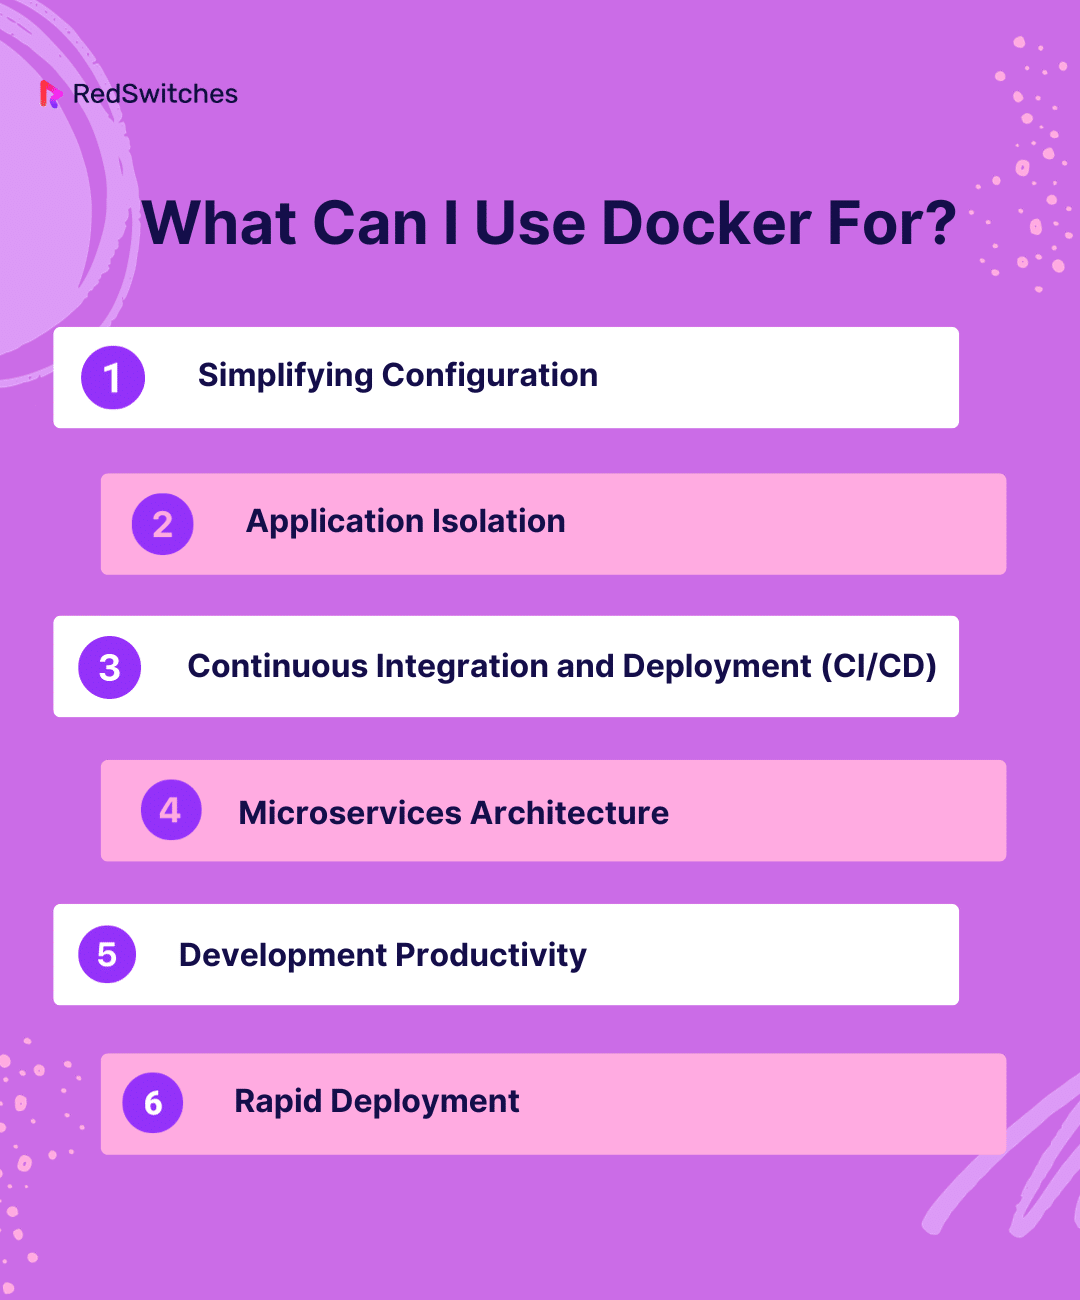 What Can I Use Docker For?